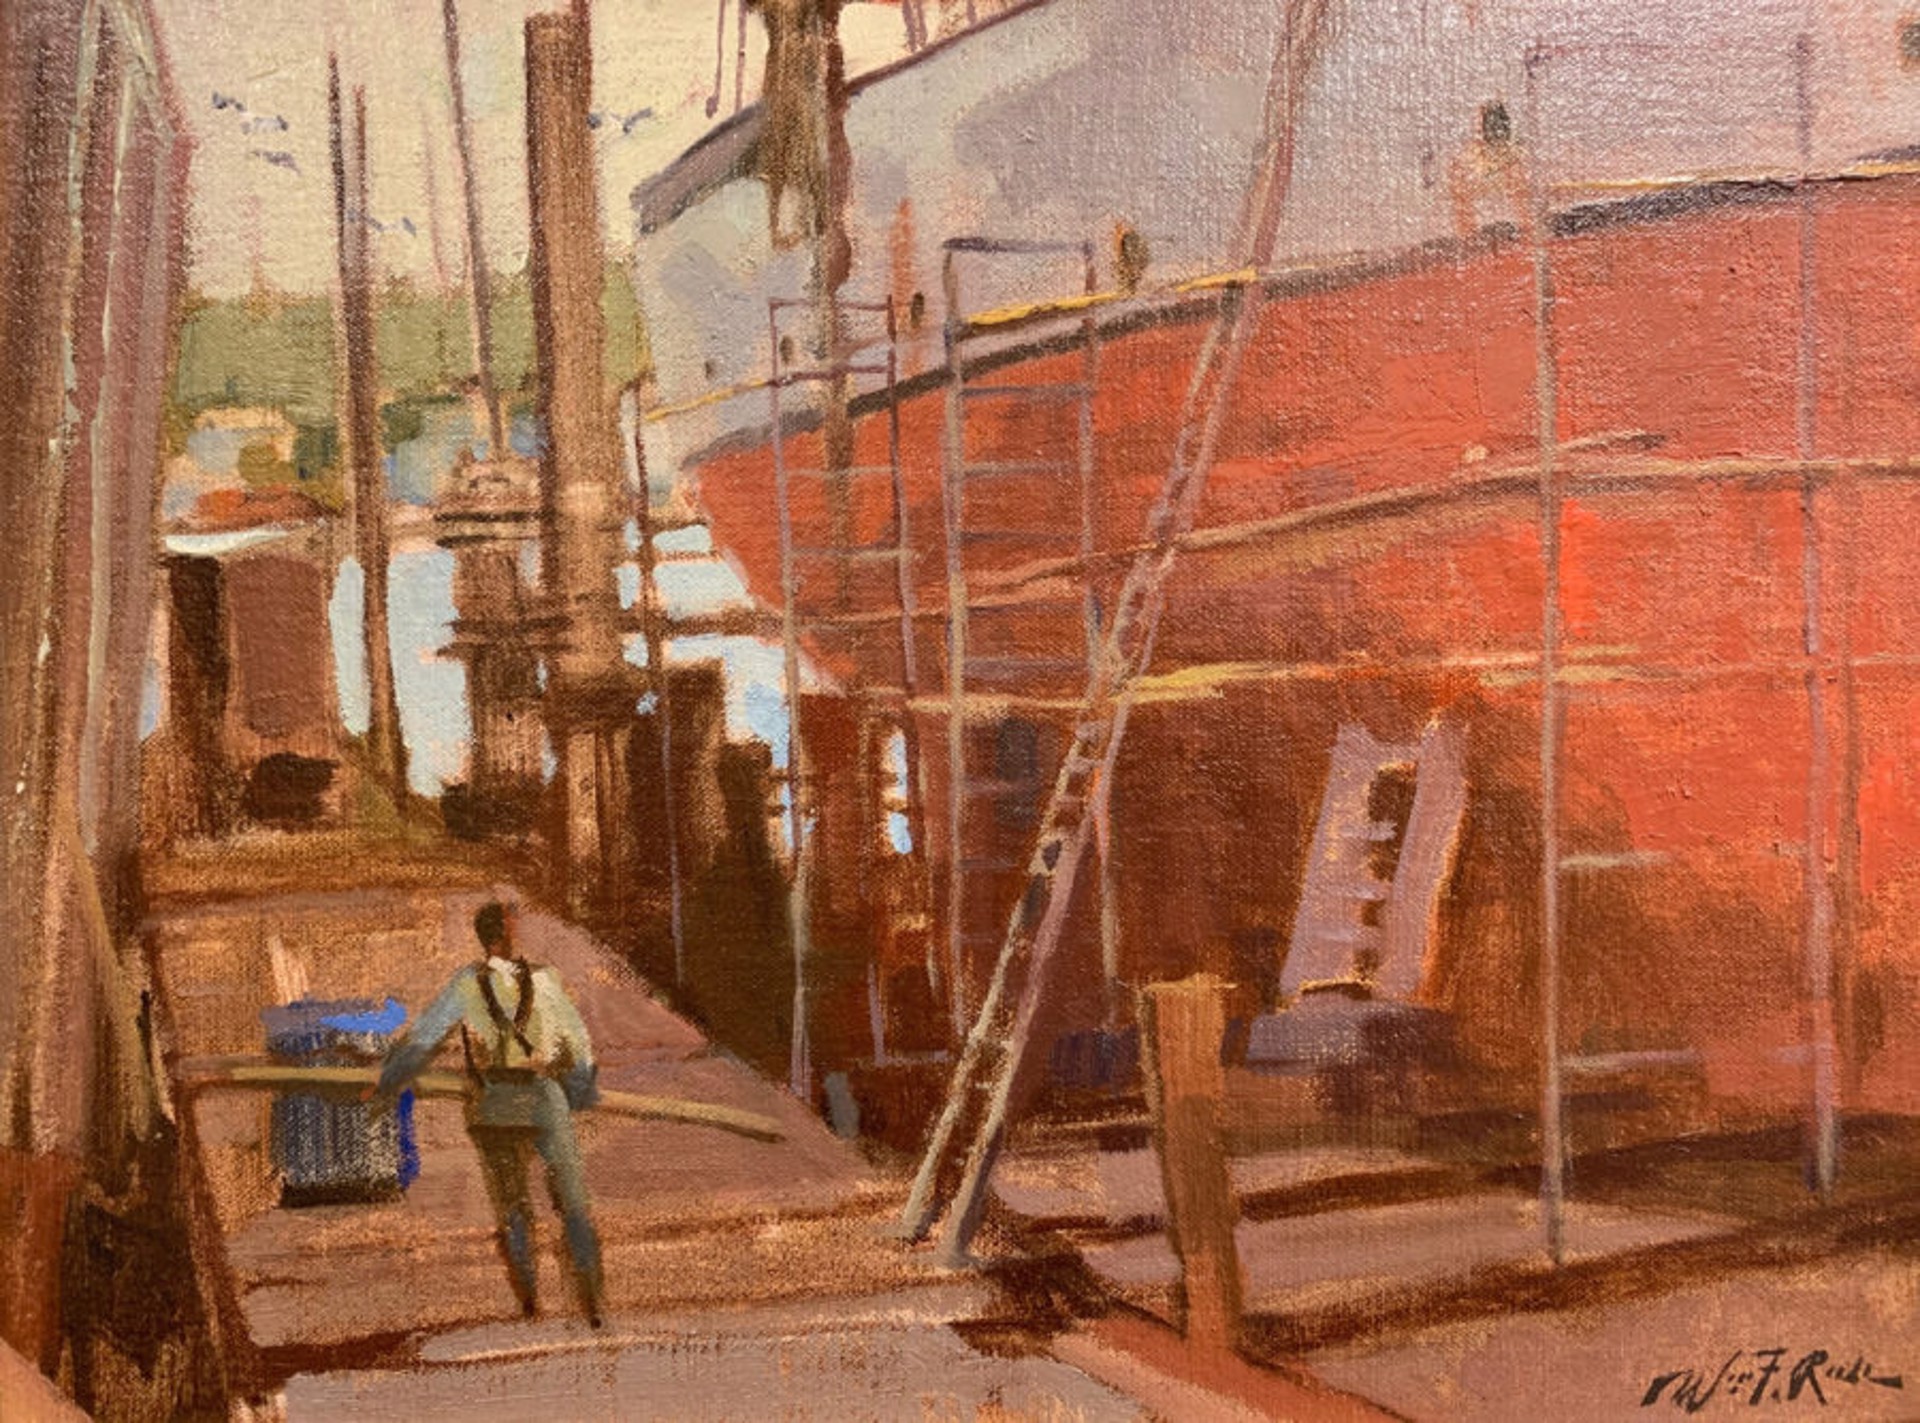 Gloucester Drydock by William F. Reese